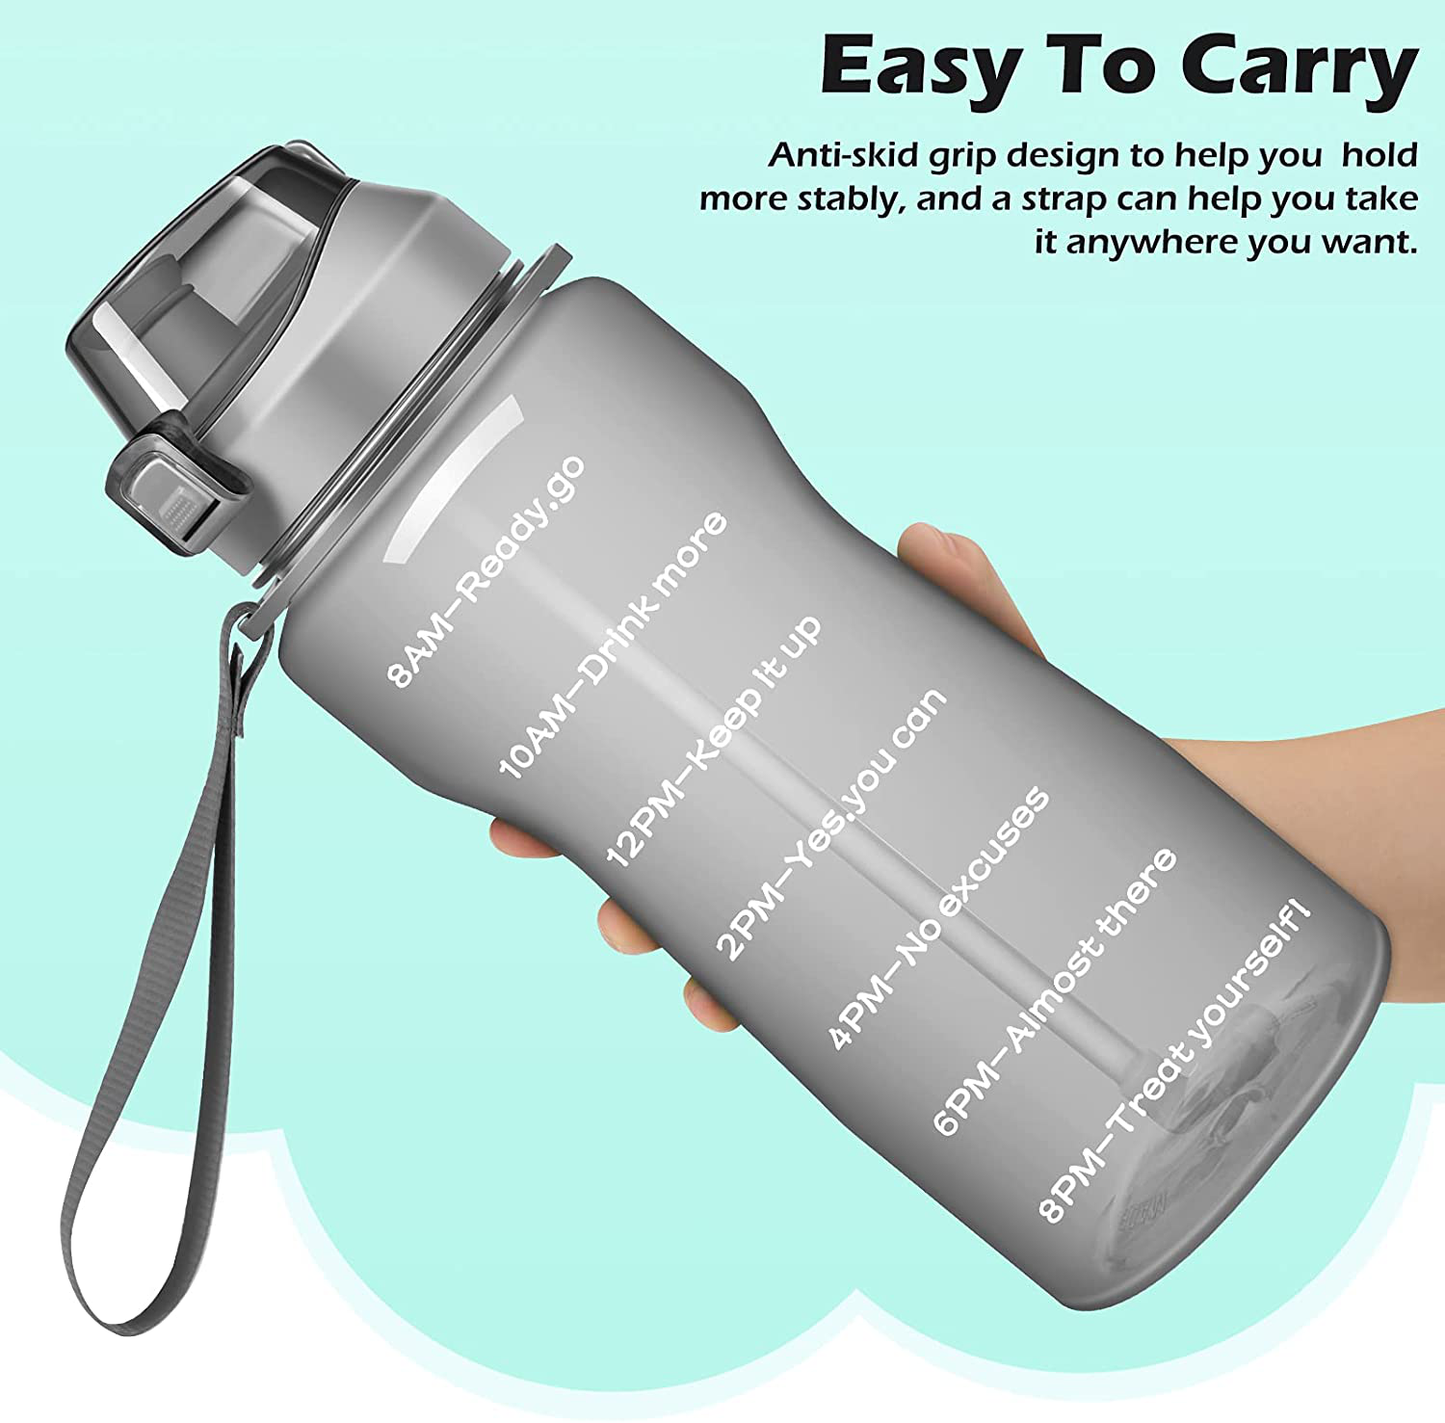 Ahape Gallon Motivational 64/100 oz Water Bottle with Time Marker & Straw, Large Daily Water Jug for Fitness Gym Outdoor Sports, Remind of All Day Hydration, Leak Proof, BPA Free (light blue, 100oz)